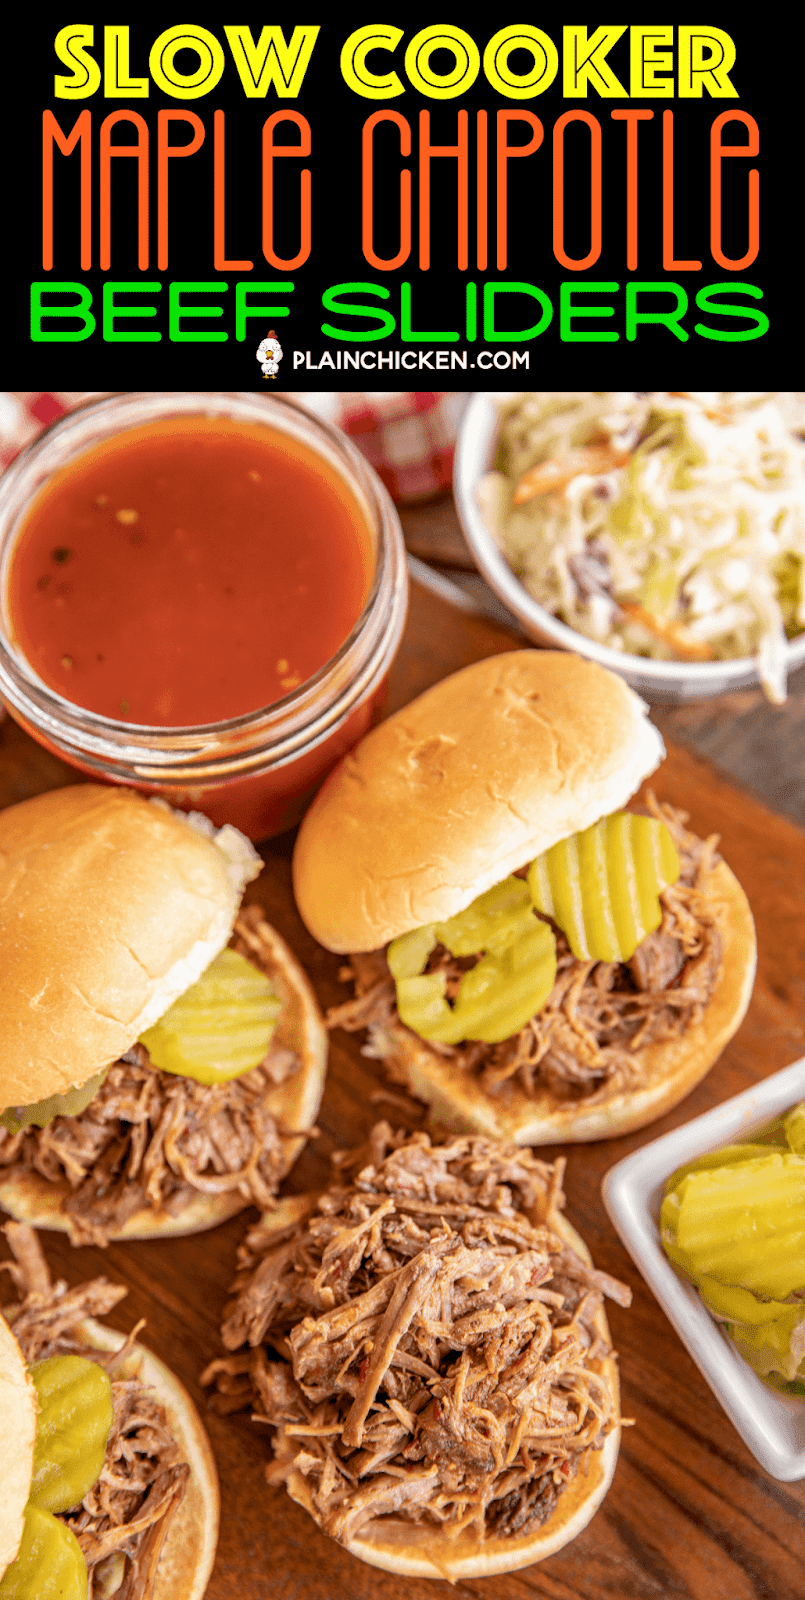 shredded beef sandwiches on serving board